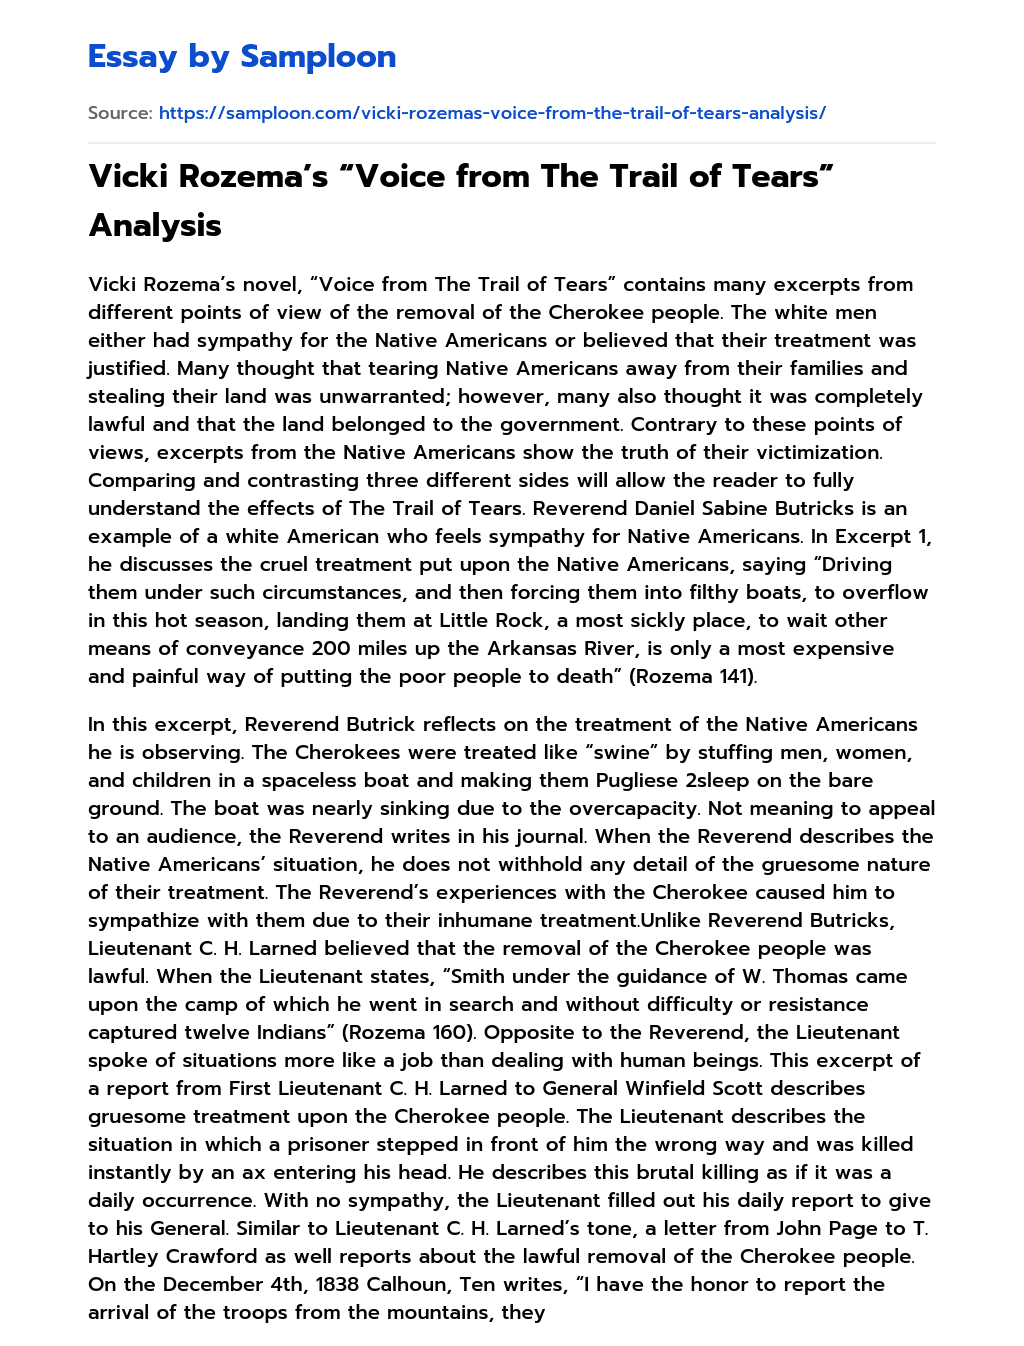 Vicki Rozema’s “Voice from The Trail of Tears” Analysis essay